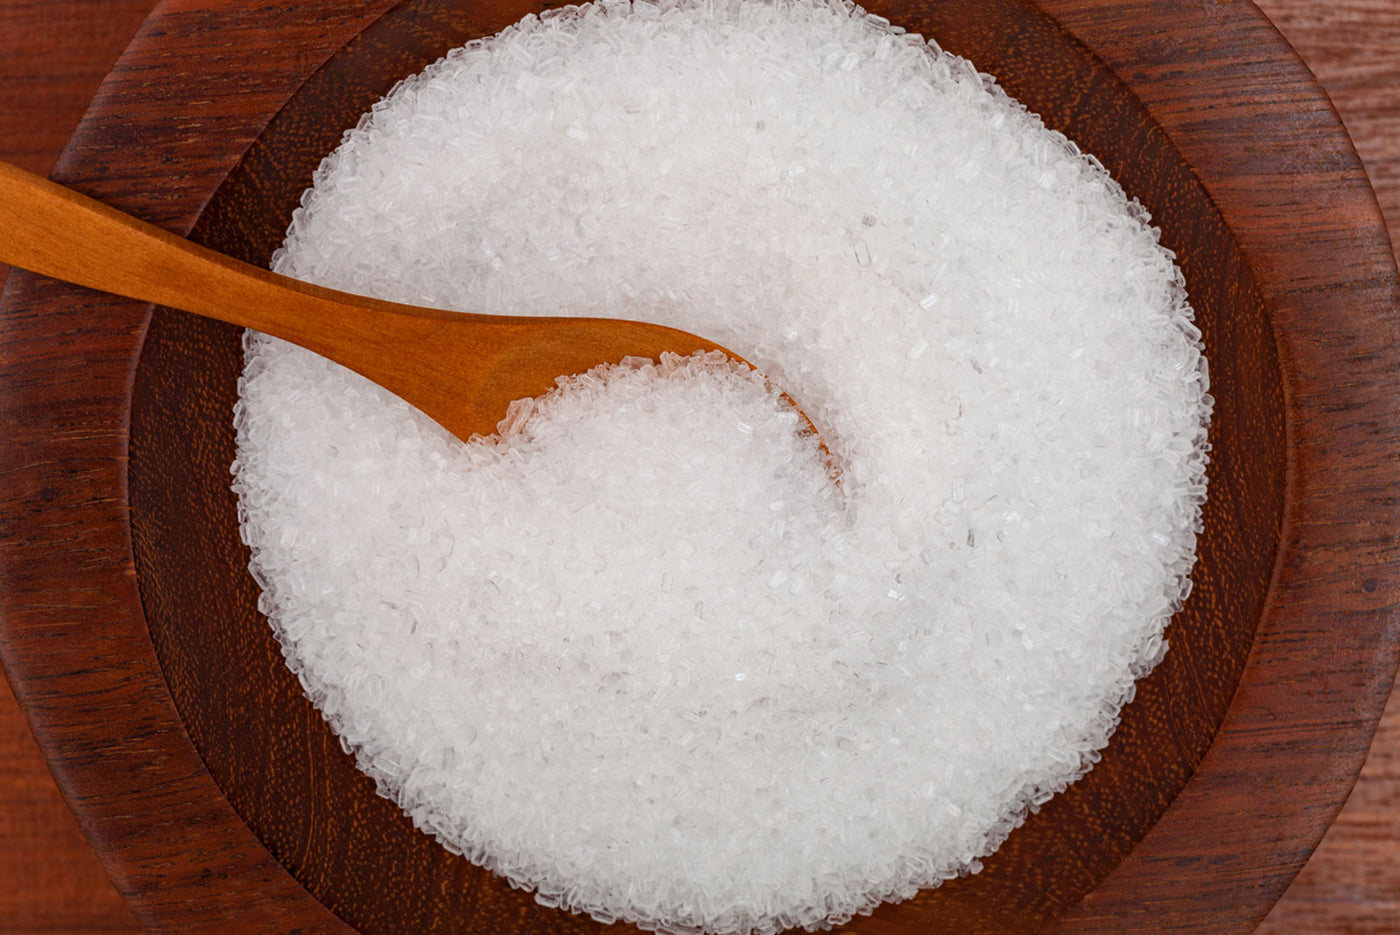 Epsom Salts and other Salts